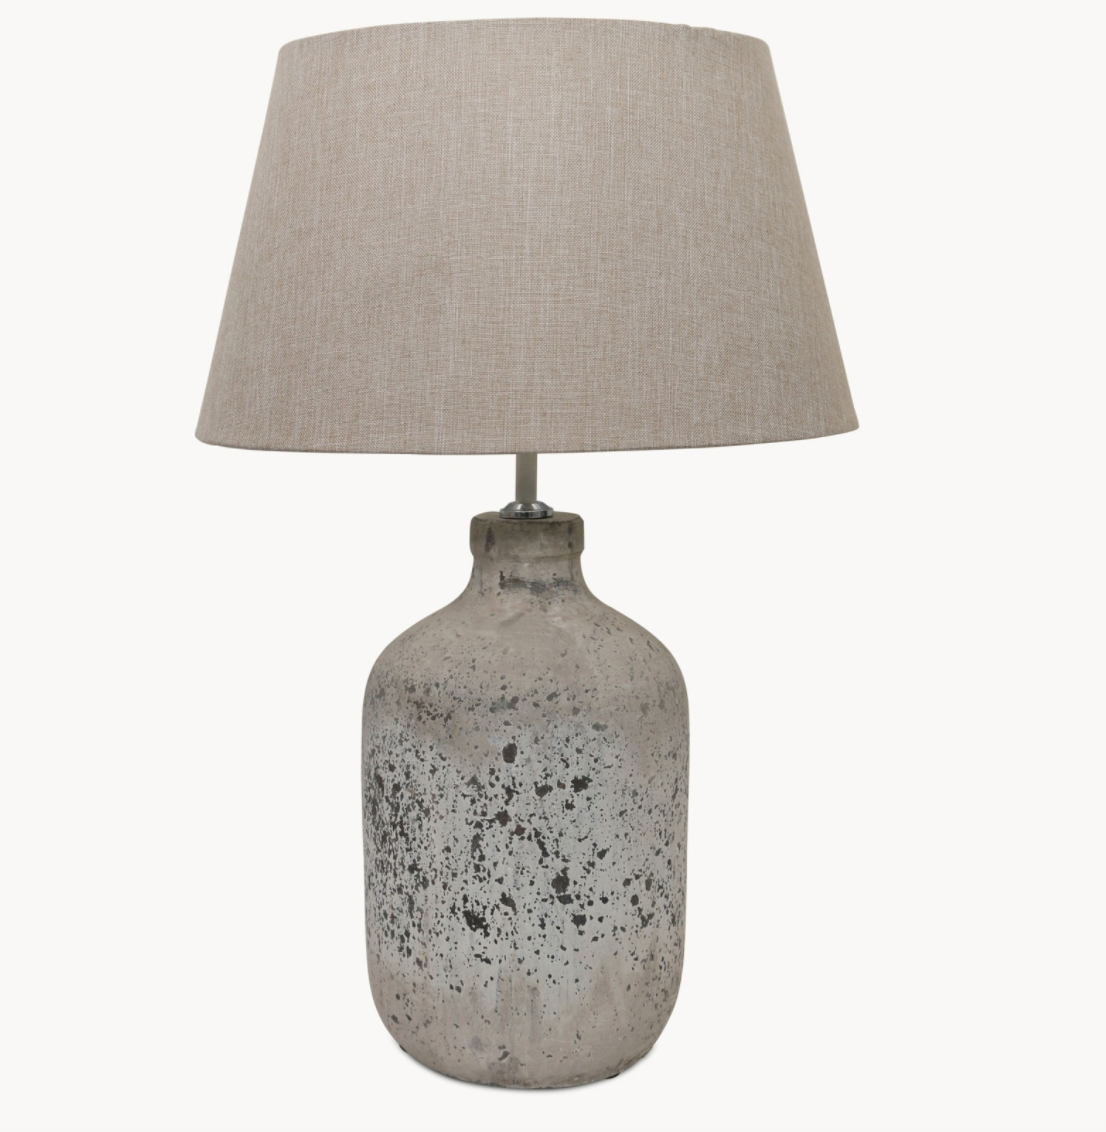 Birkdale Stone Lamp With Neutral Shade